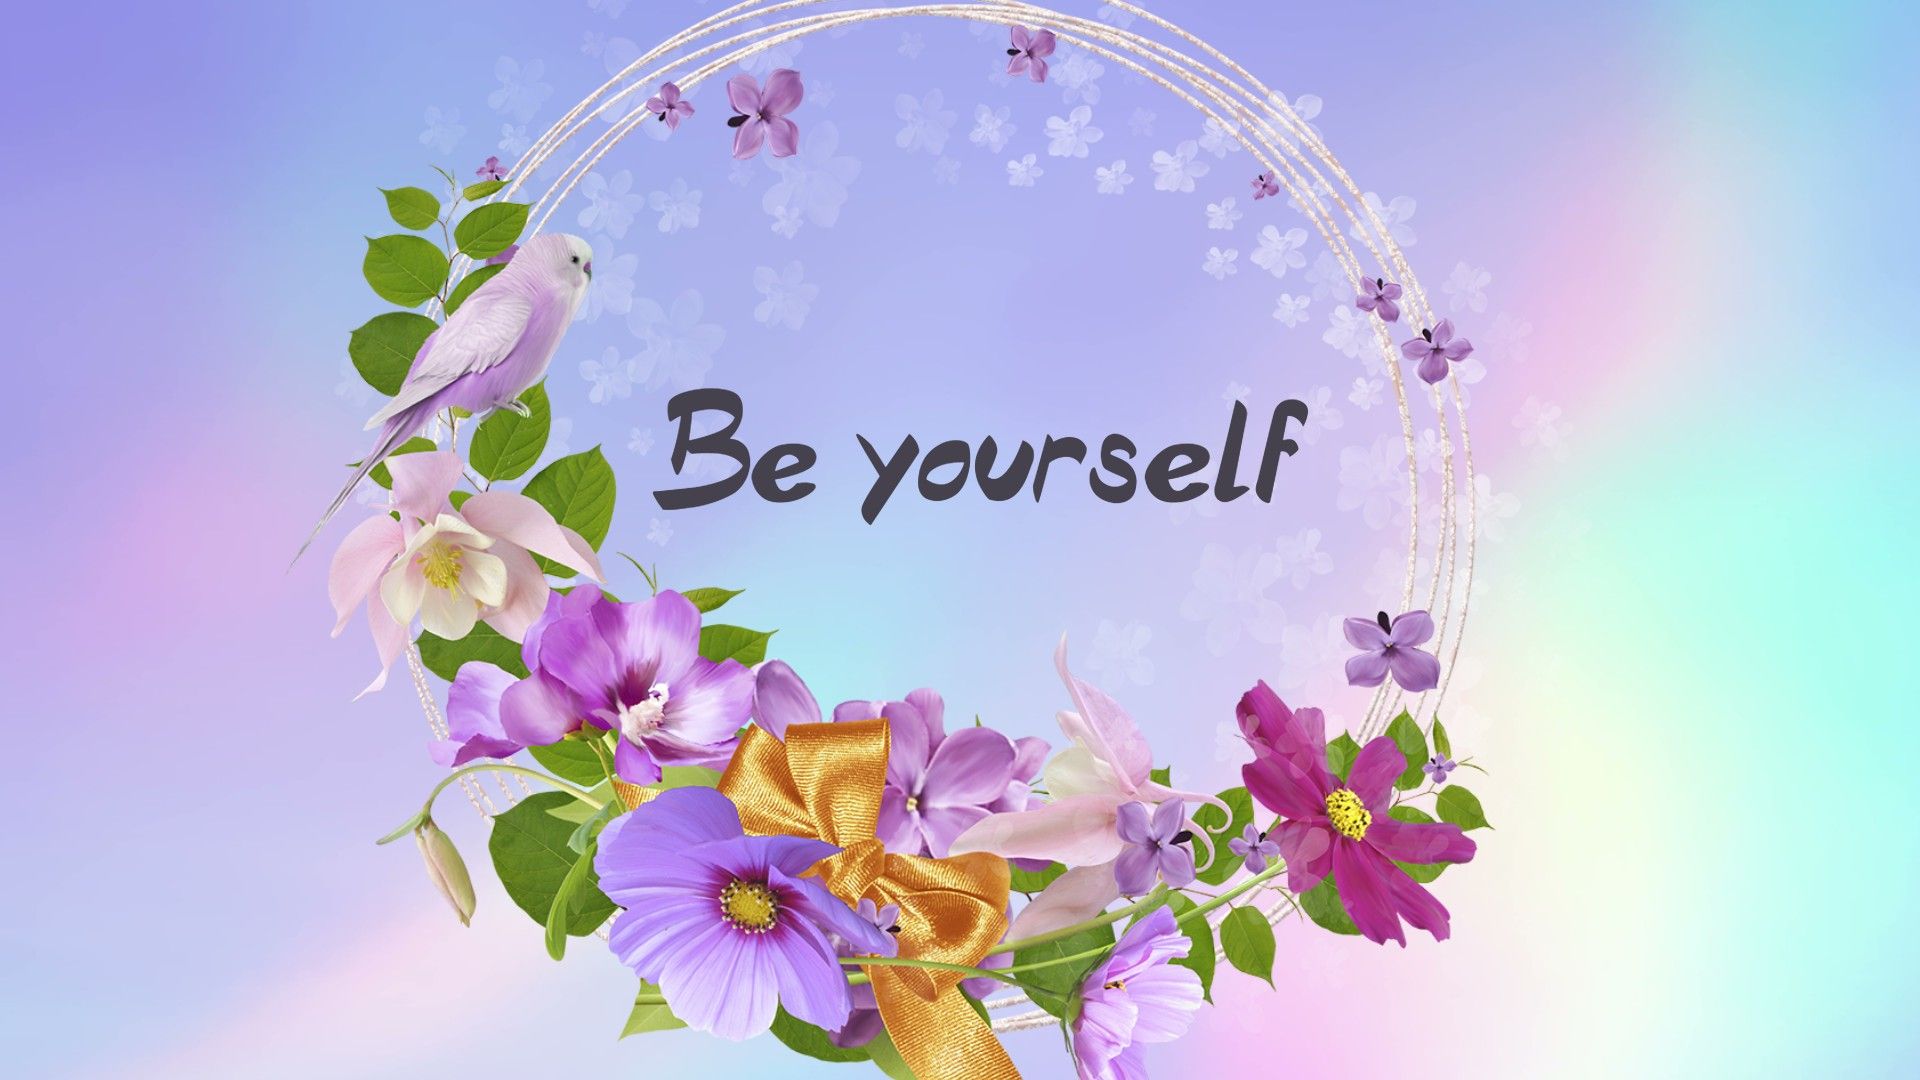 Be yourself laptop home screen - Wallpaper Cave